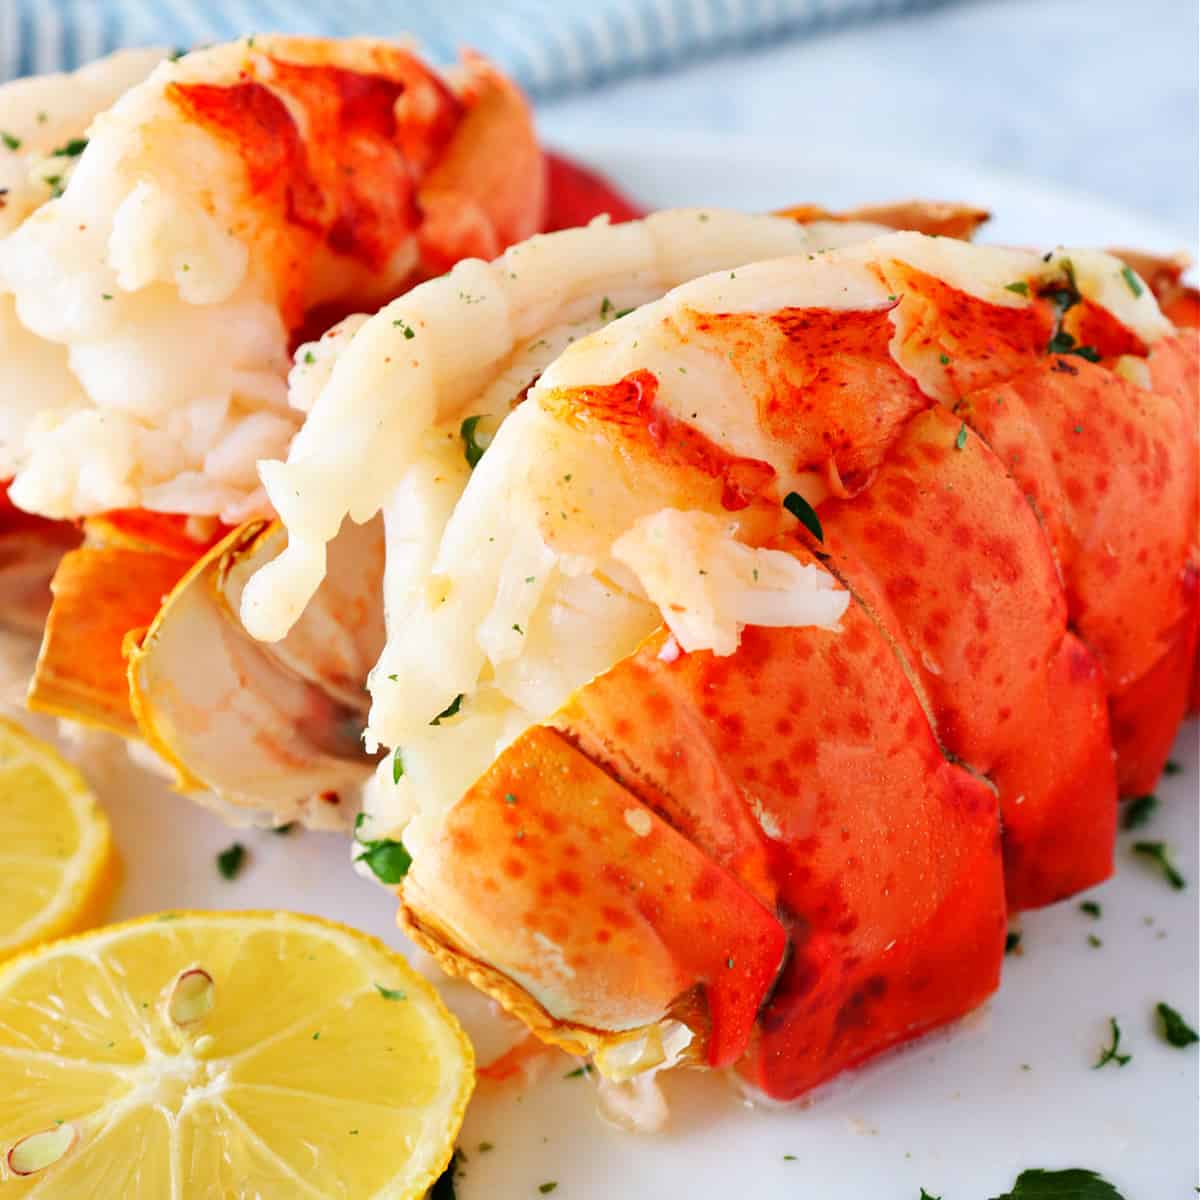 Lobster tails with lemon.